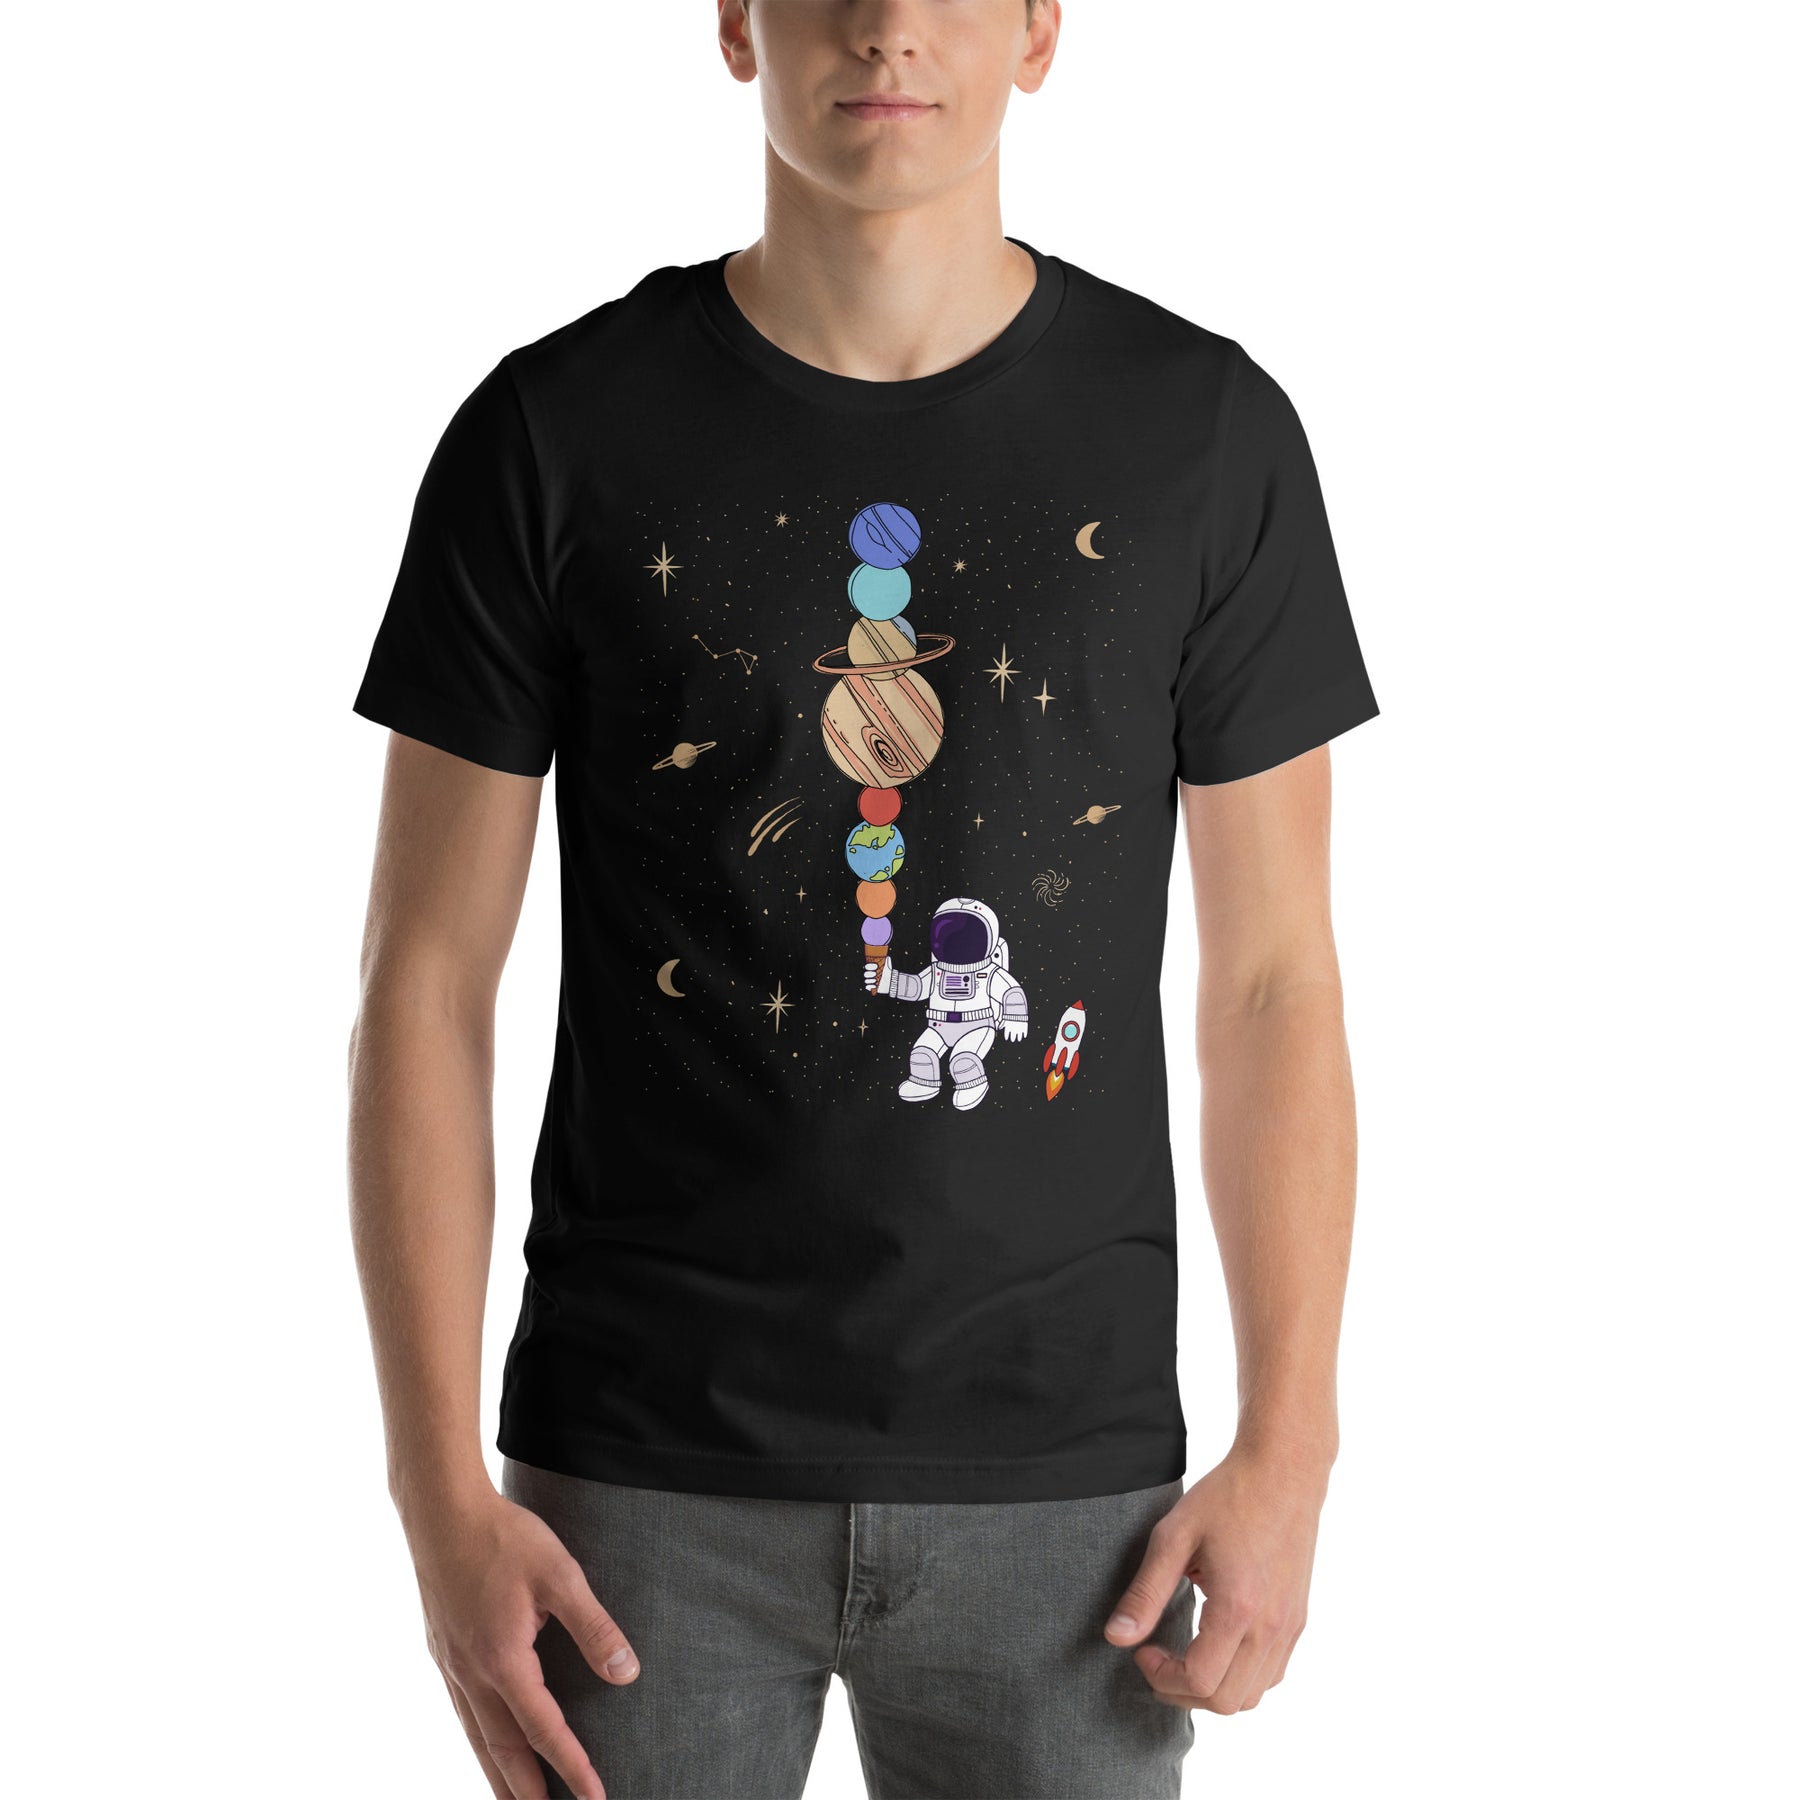 Funny Astronaut Planet Ice Cream T-Shirt - Space Geek Gift - Galaxy Solar System